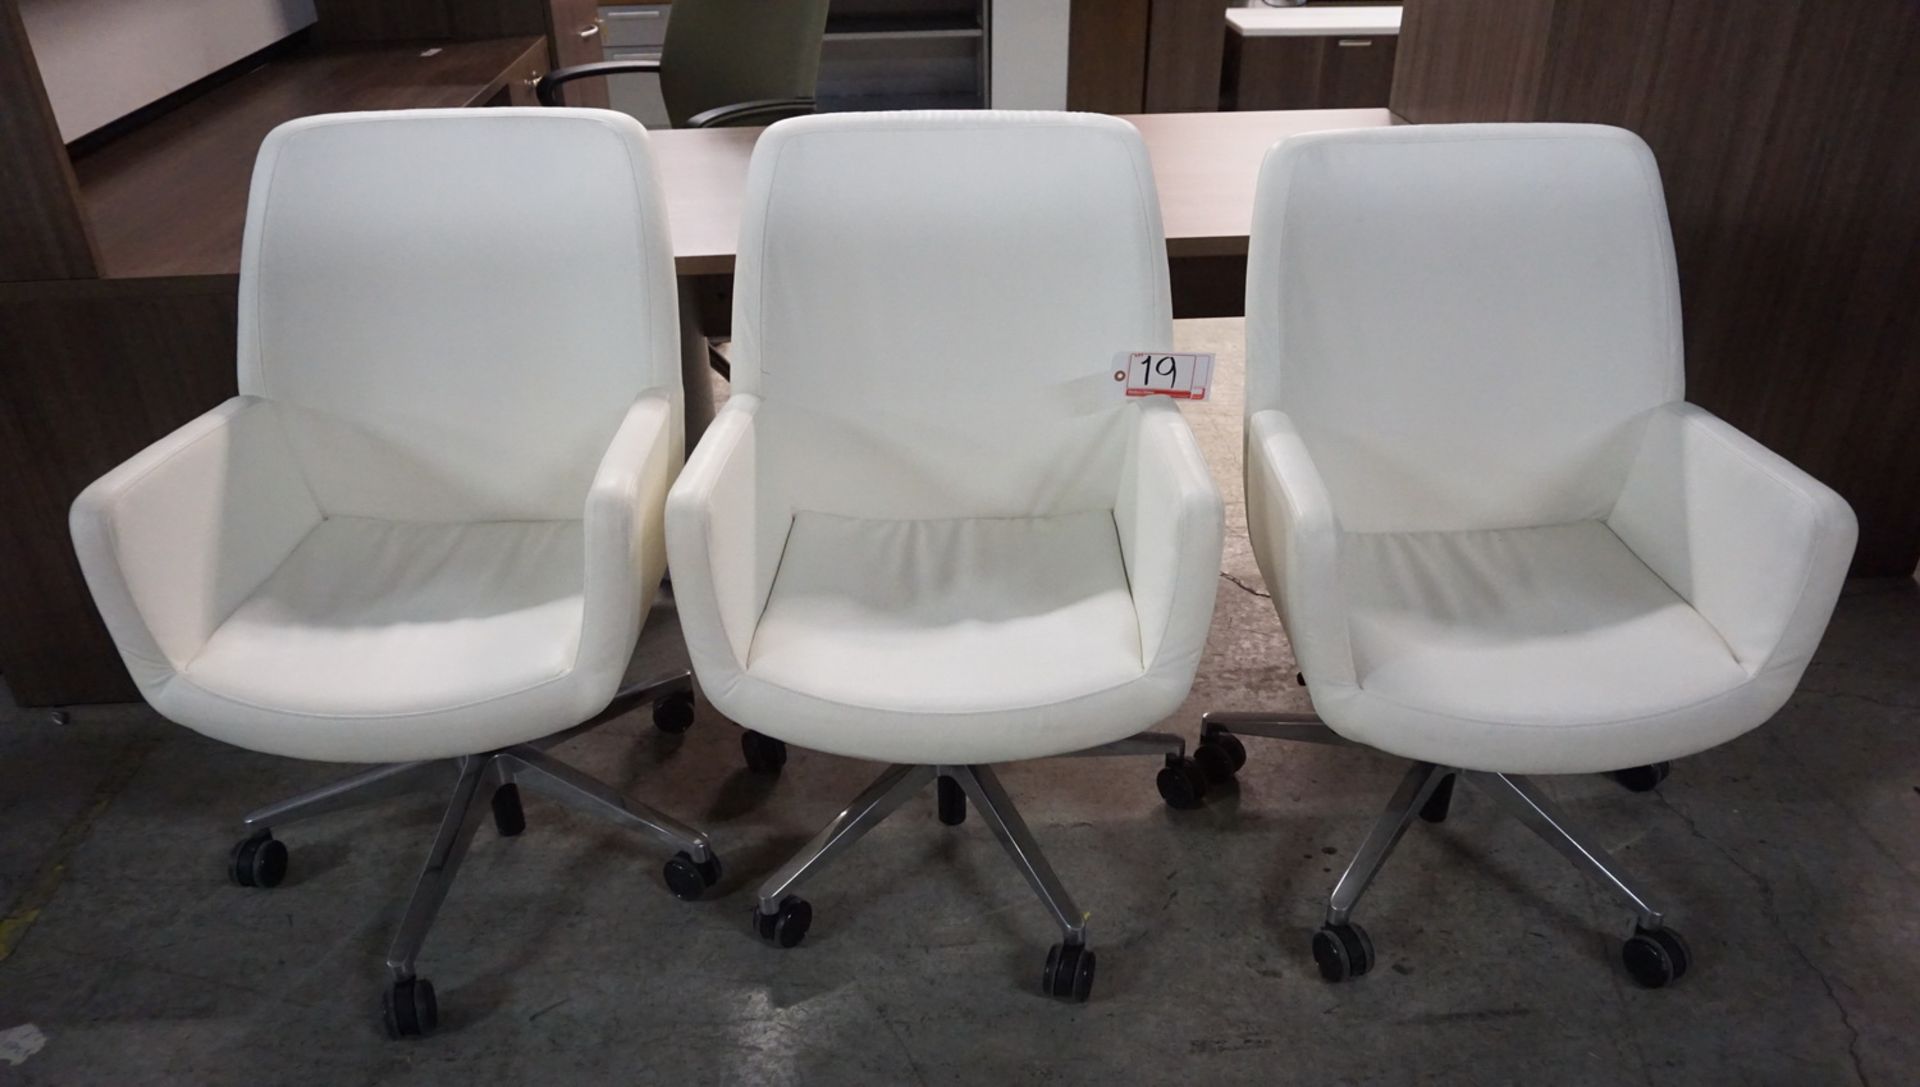 UNITS - STEELCASE COALESSE (IVORY) PNEU AJD OFFICE CHAIRS - Image 2 of 2